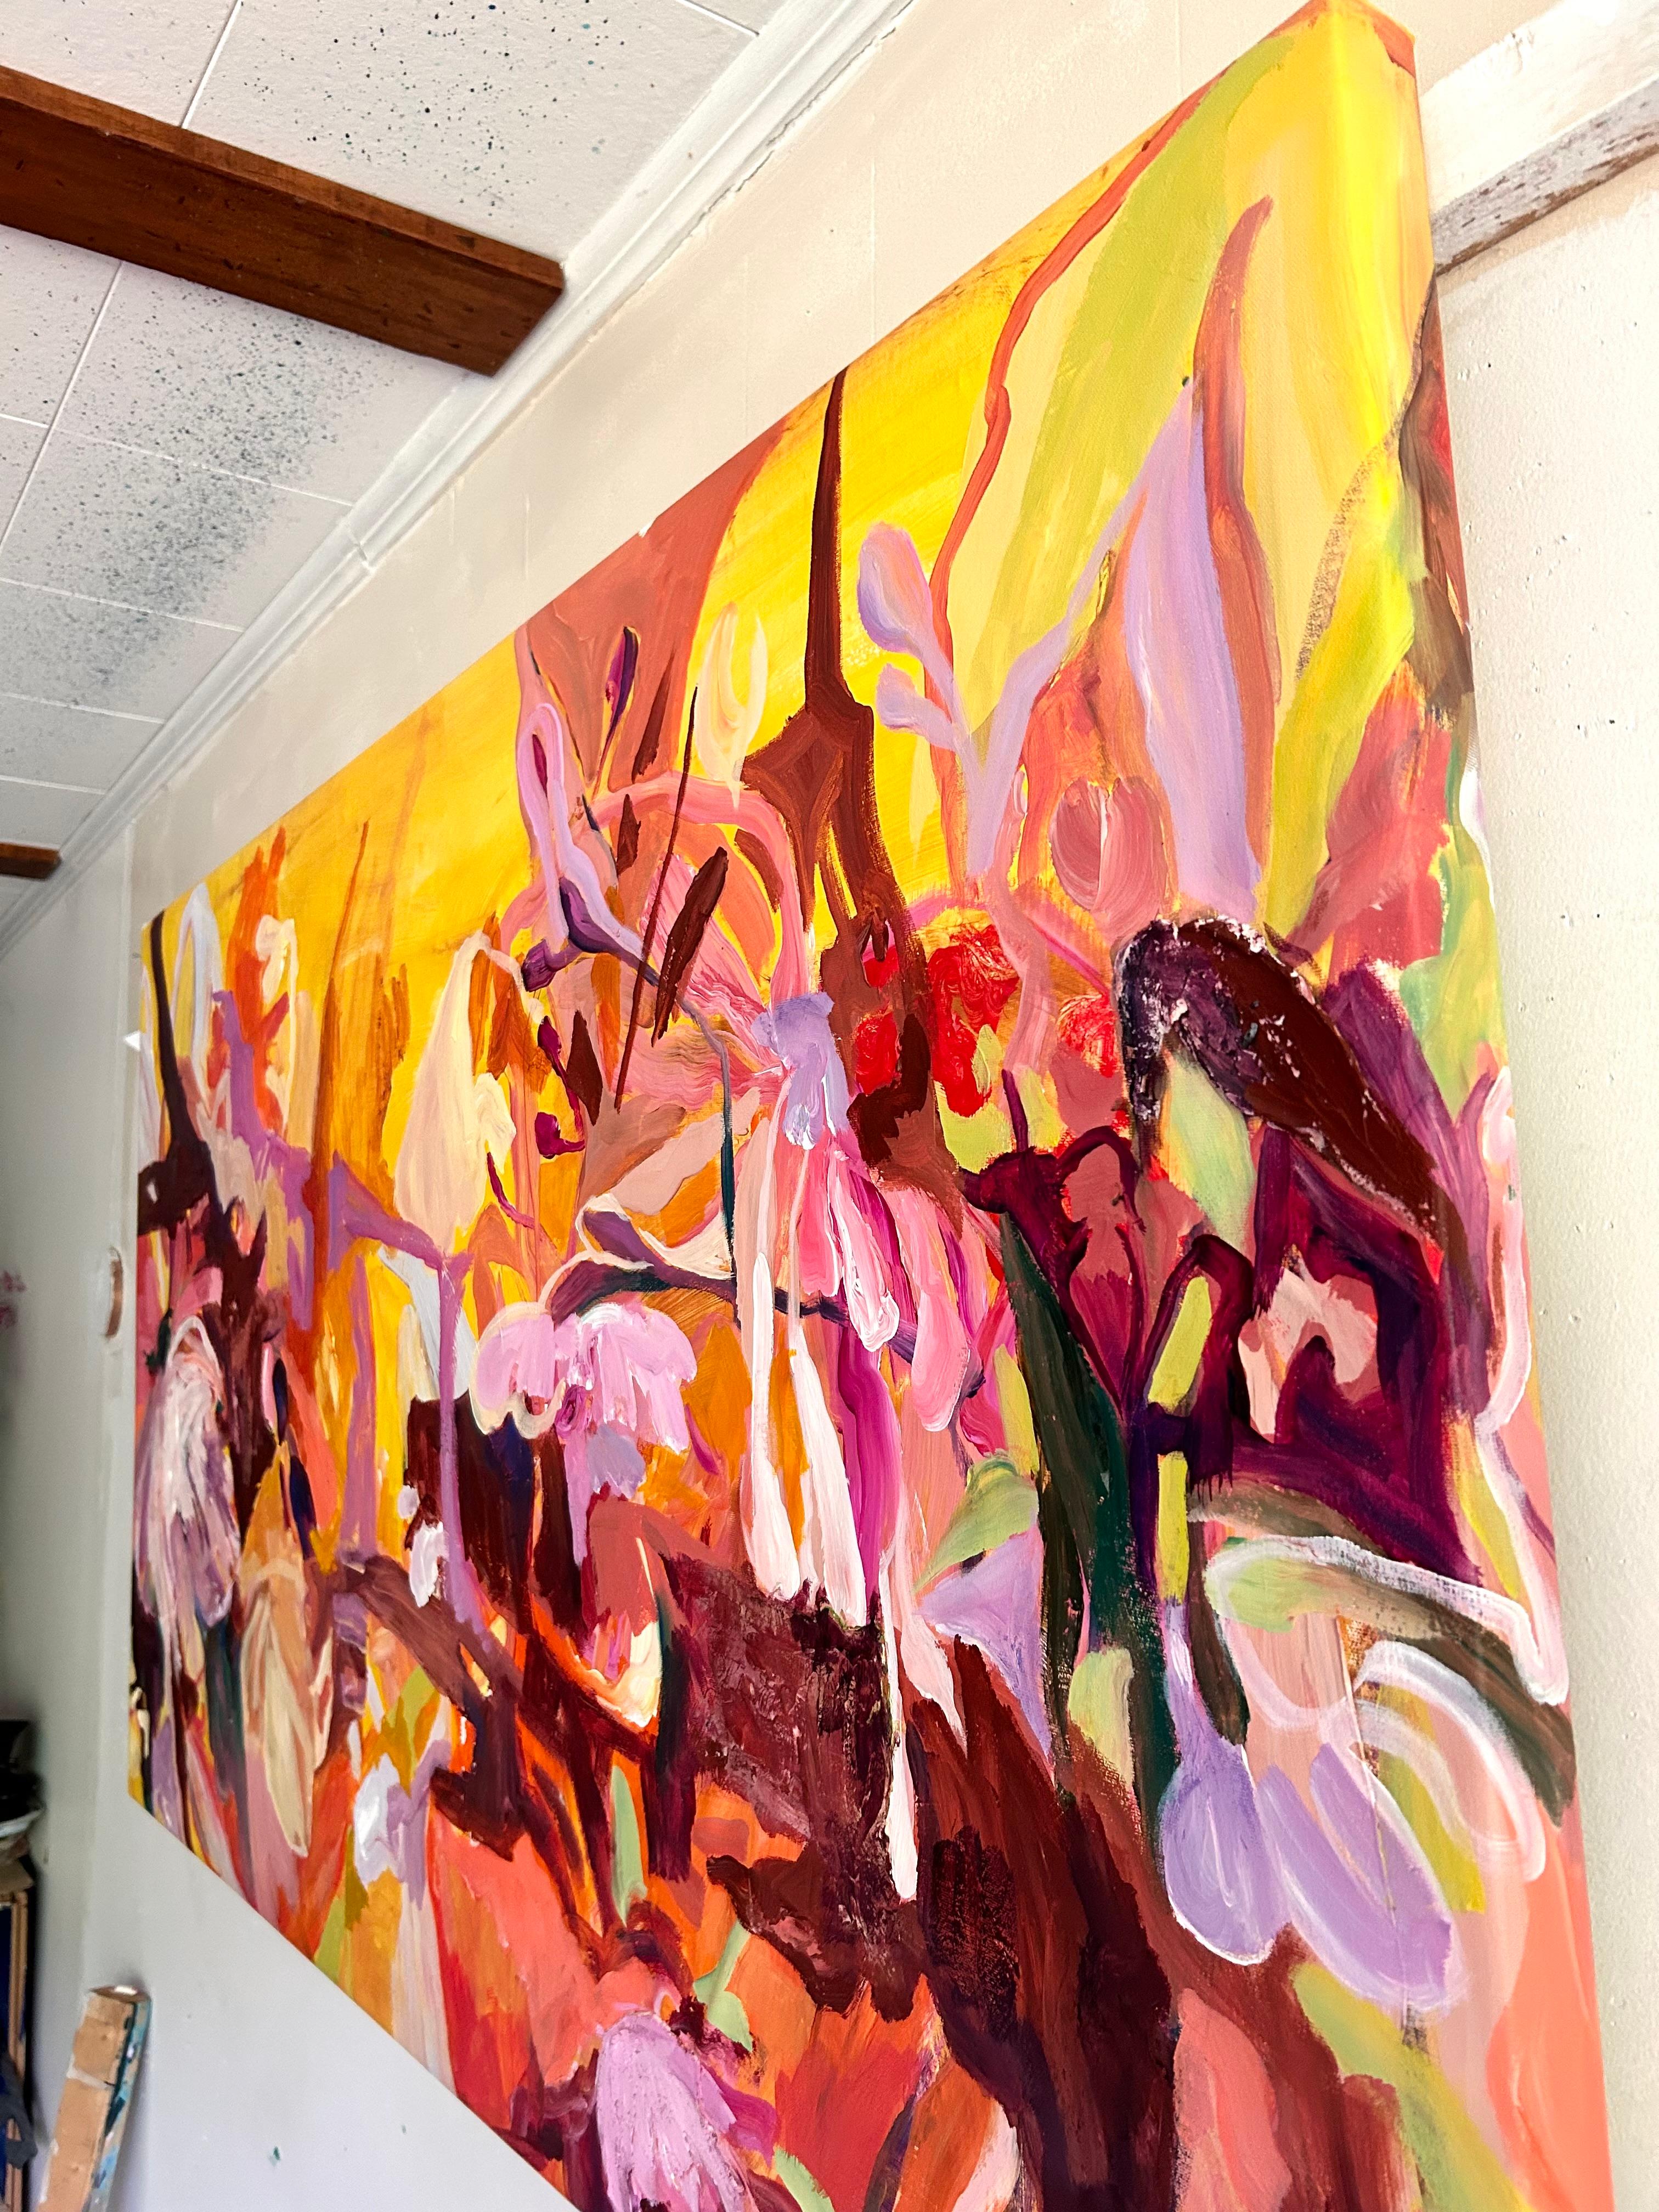 <p>Artist Comments<br>Artist Julia Hacker presents an abstract floral that showcases vibrant orange, pink, and yellow botanicals that exude passion and joy. The energetic color palette represents the organic shapes of plants. Swirls and loops create